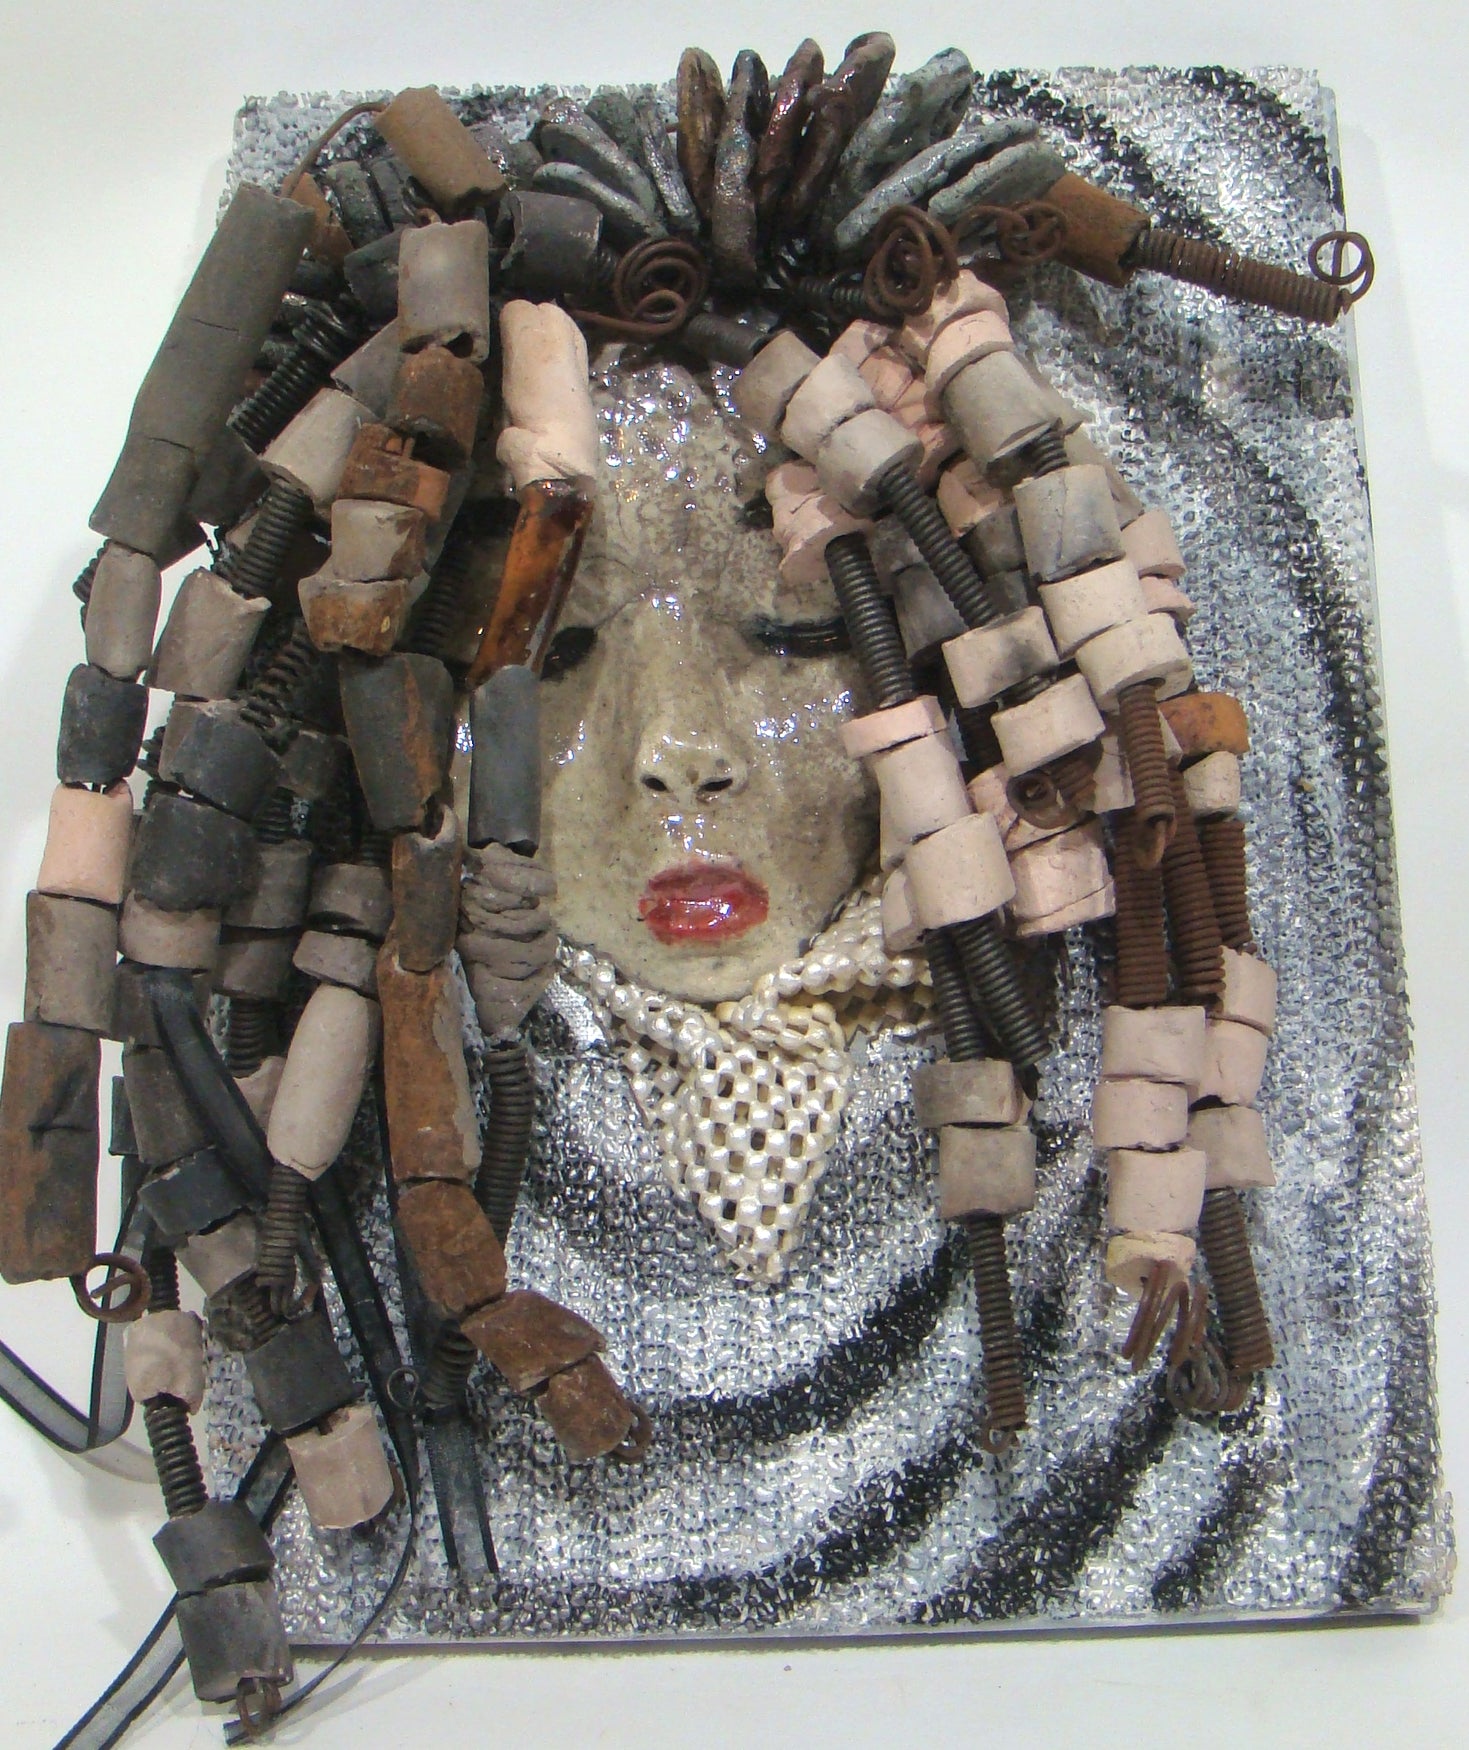     She has over 30 feet of 16 gauge wire for hair and over 60 raku beads.     Reagan has a white crackle face with ruby red lips.     She is ready to be hung!